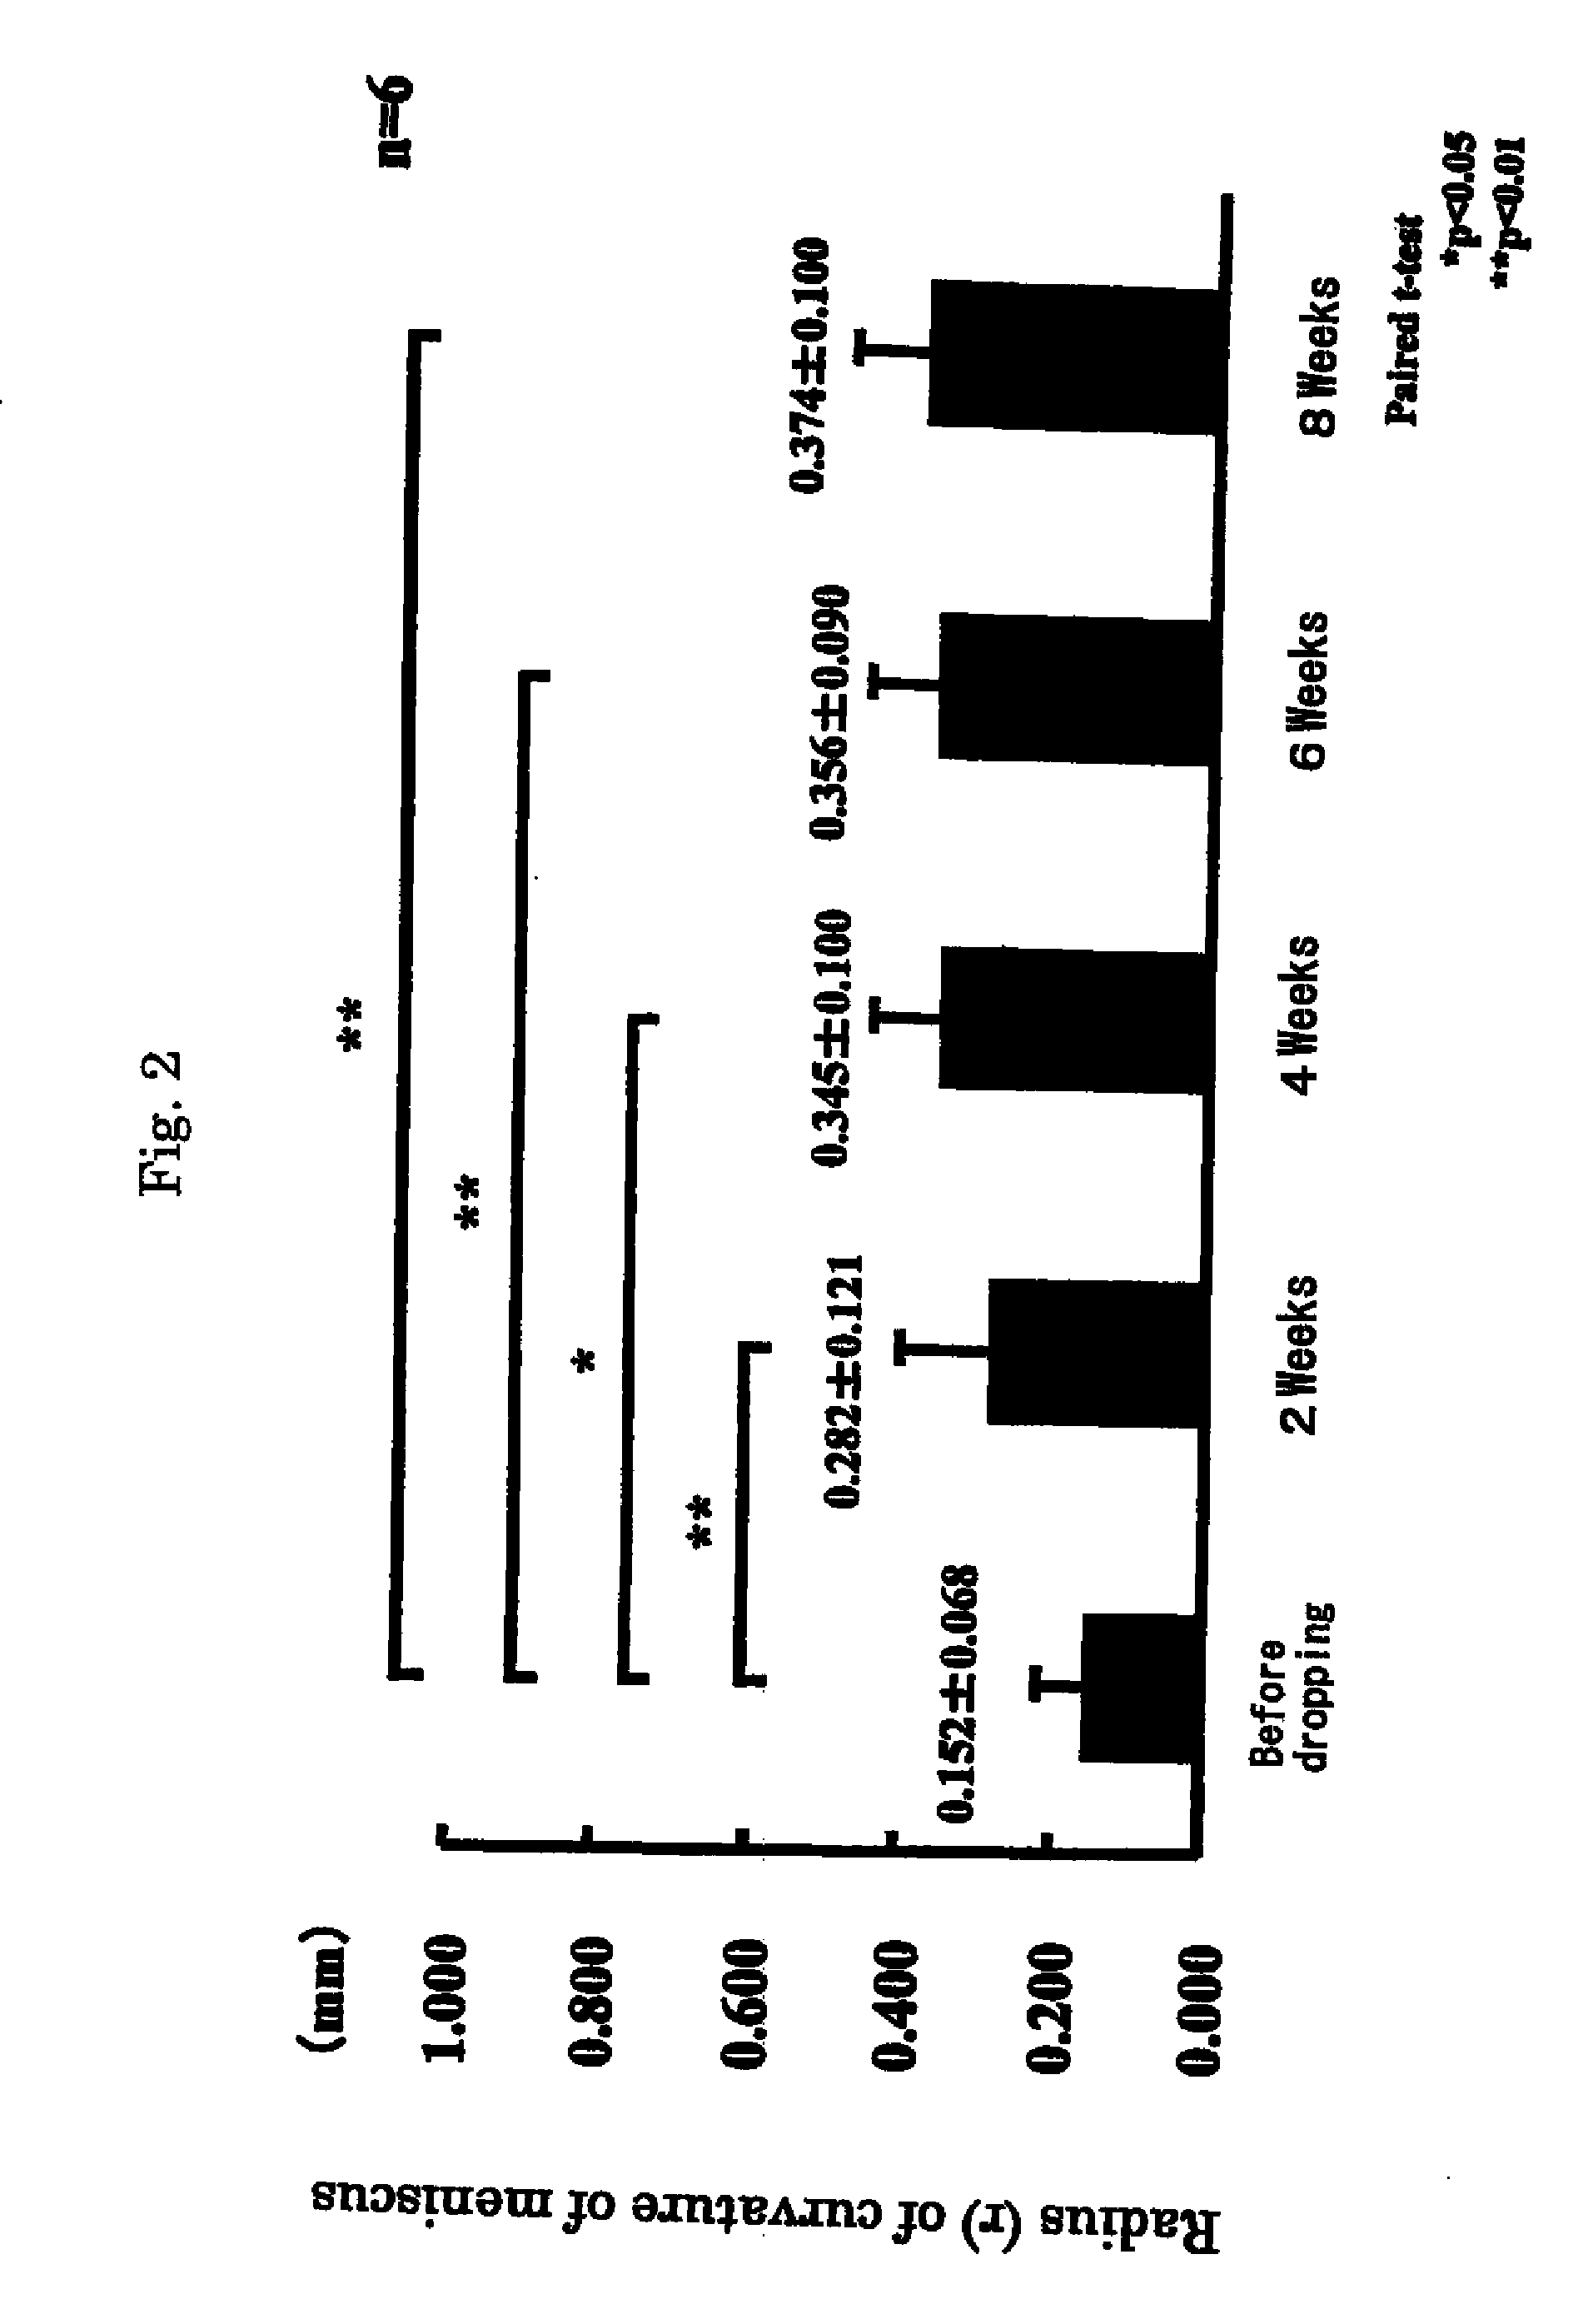 Therapeutic agent for ophthalmic diseases